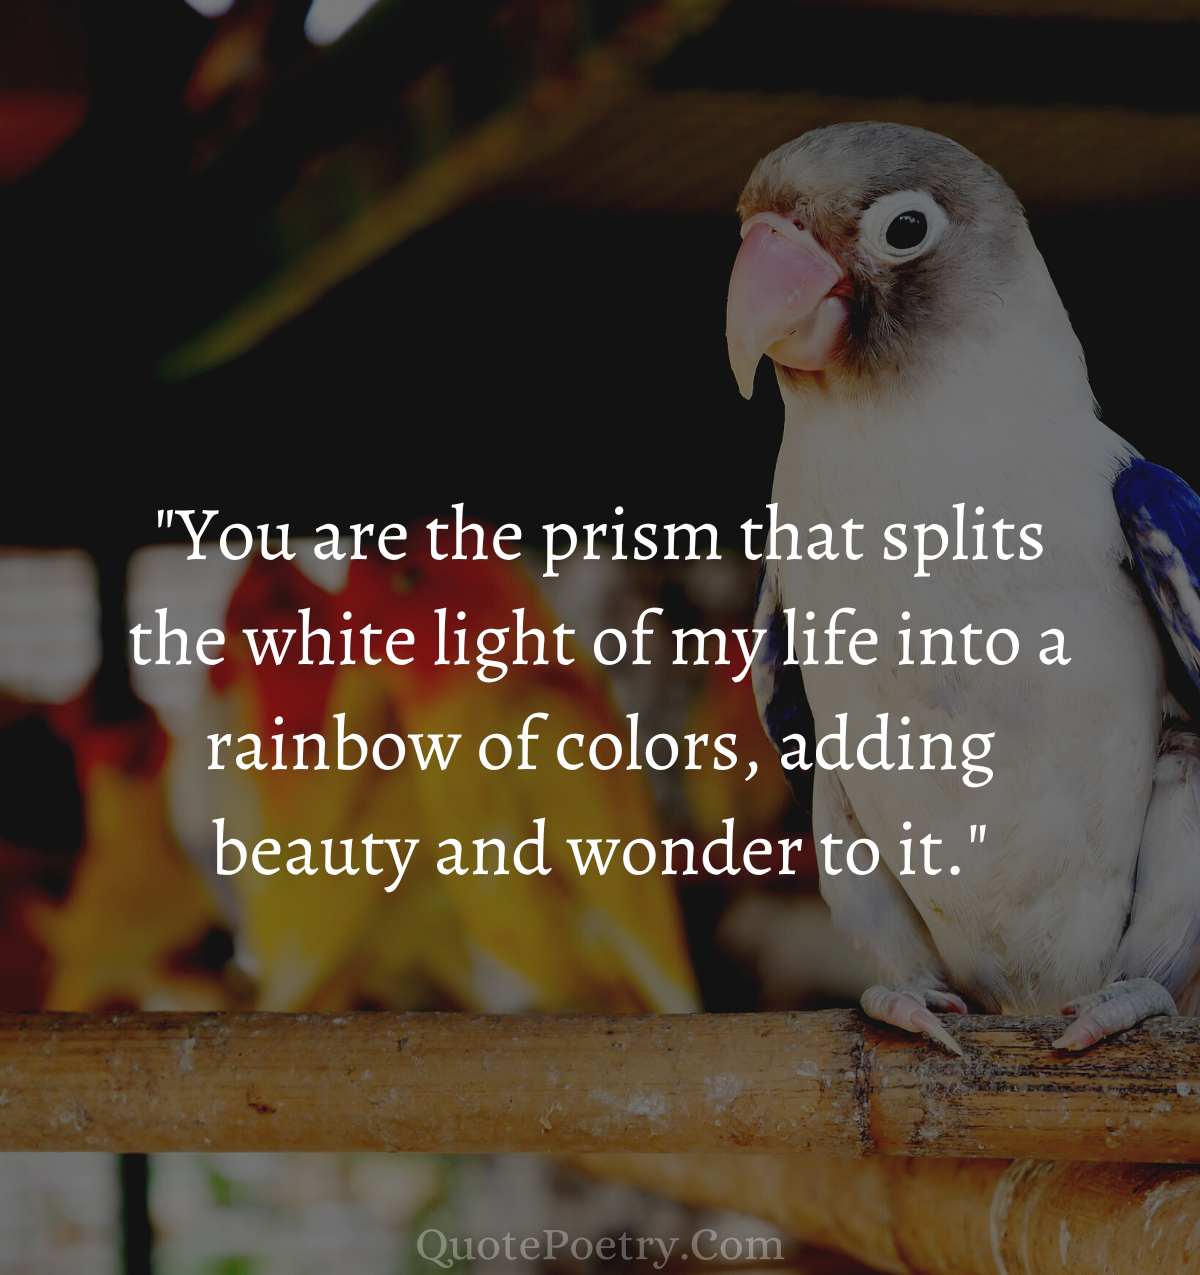 40 You Bring Color To My Life Quotes - Quote Poetry